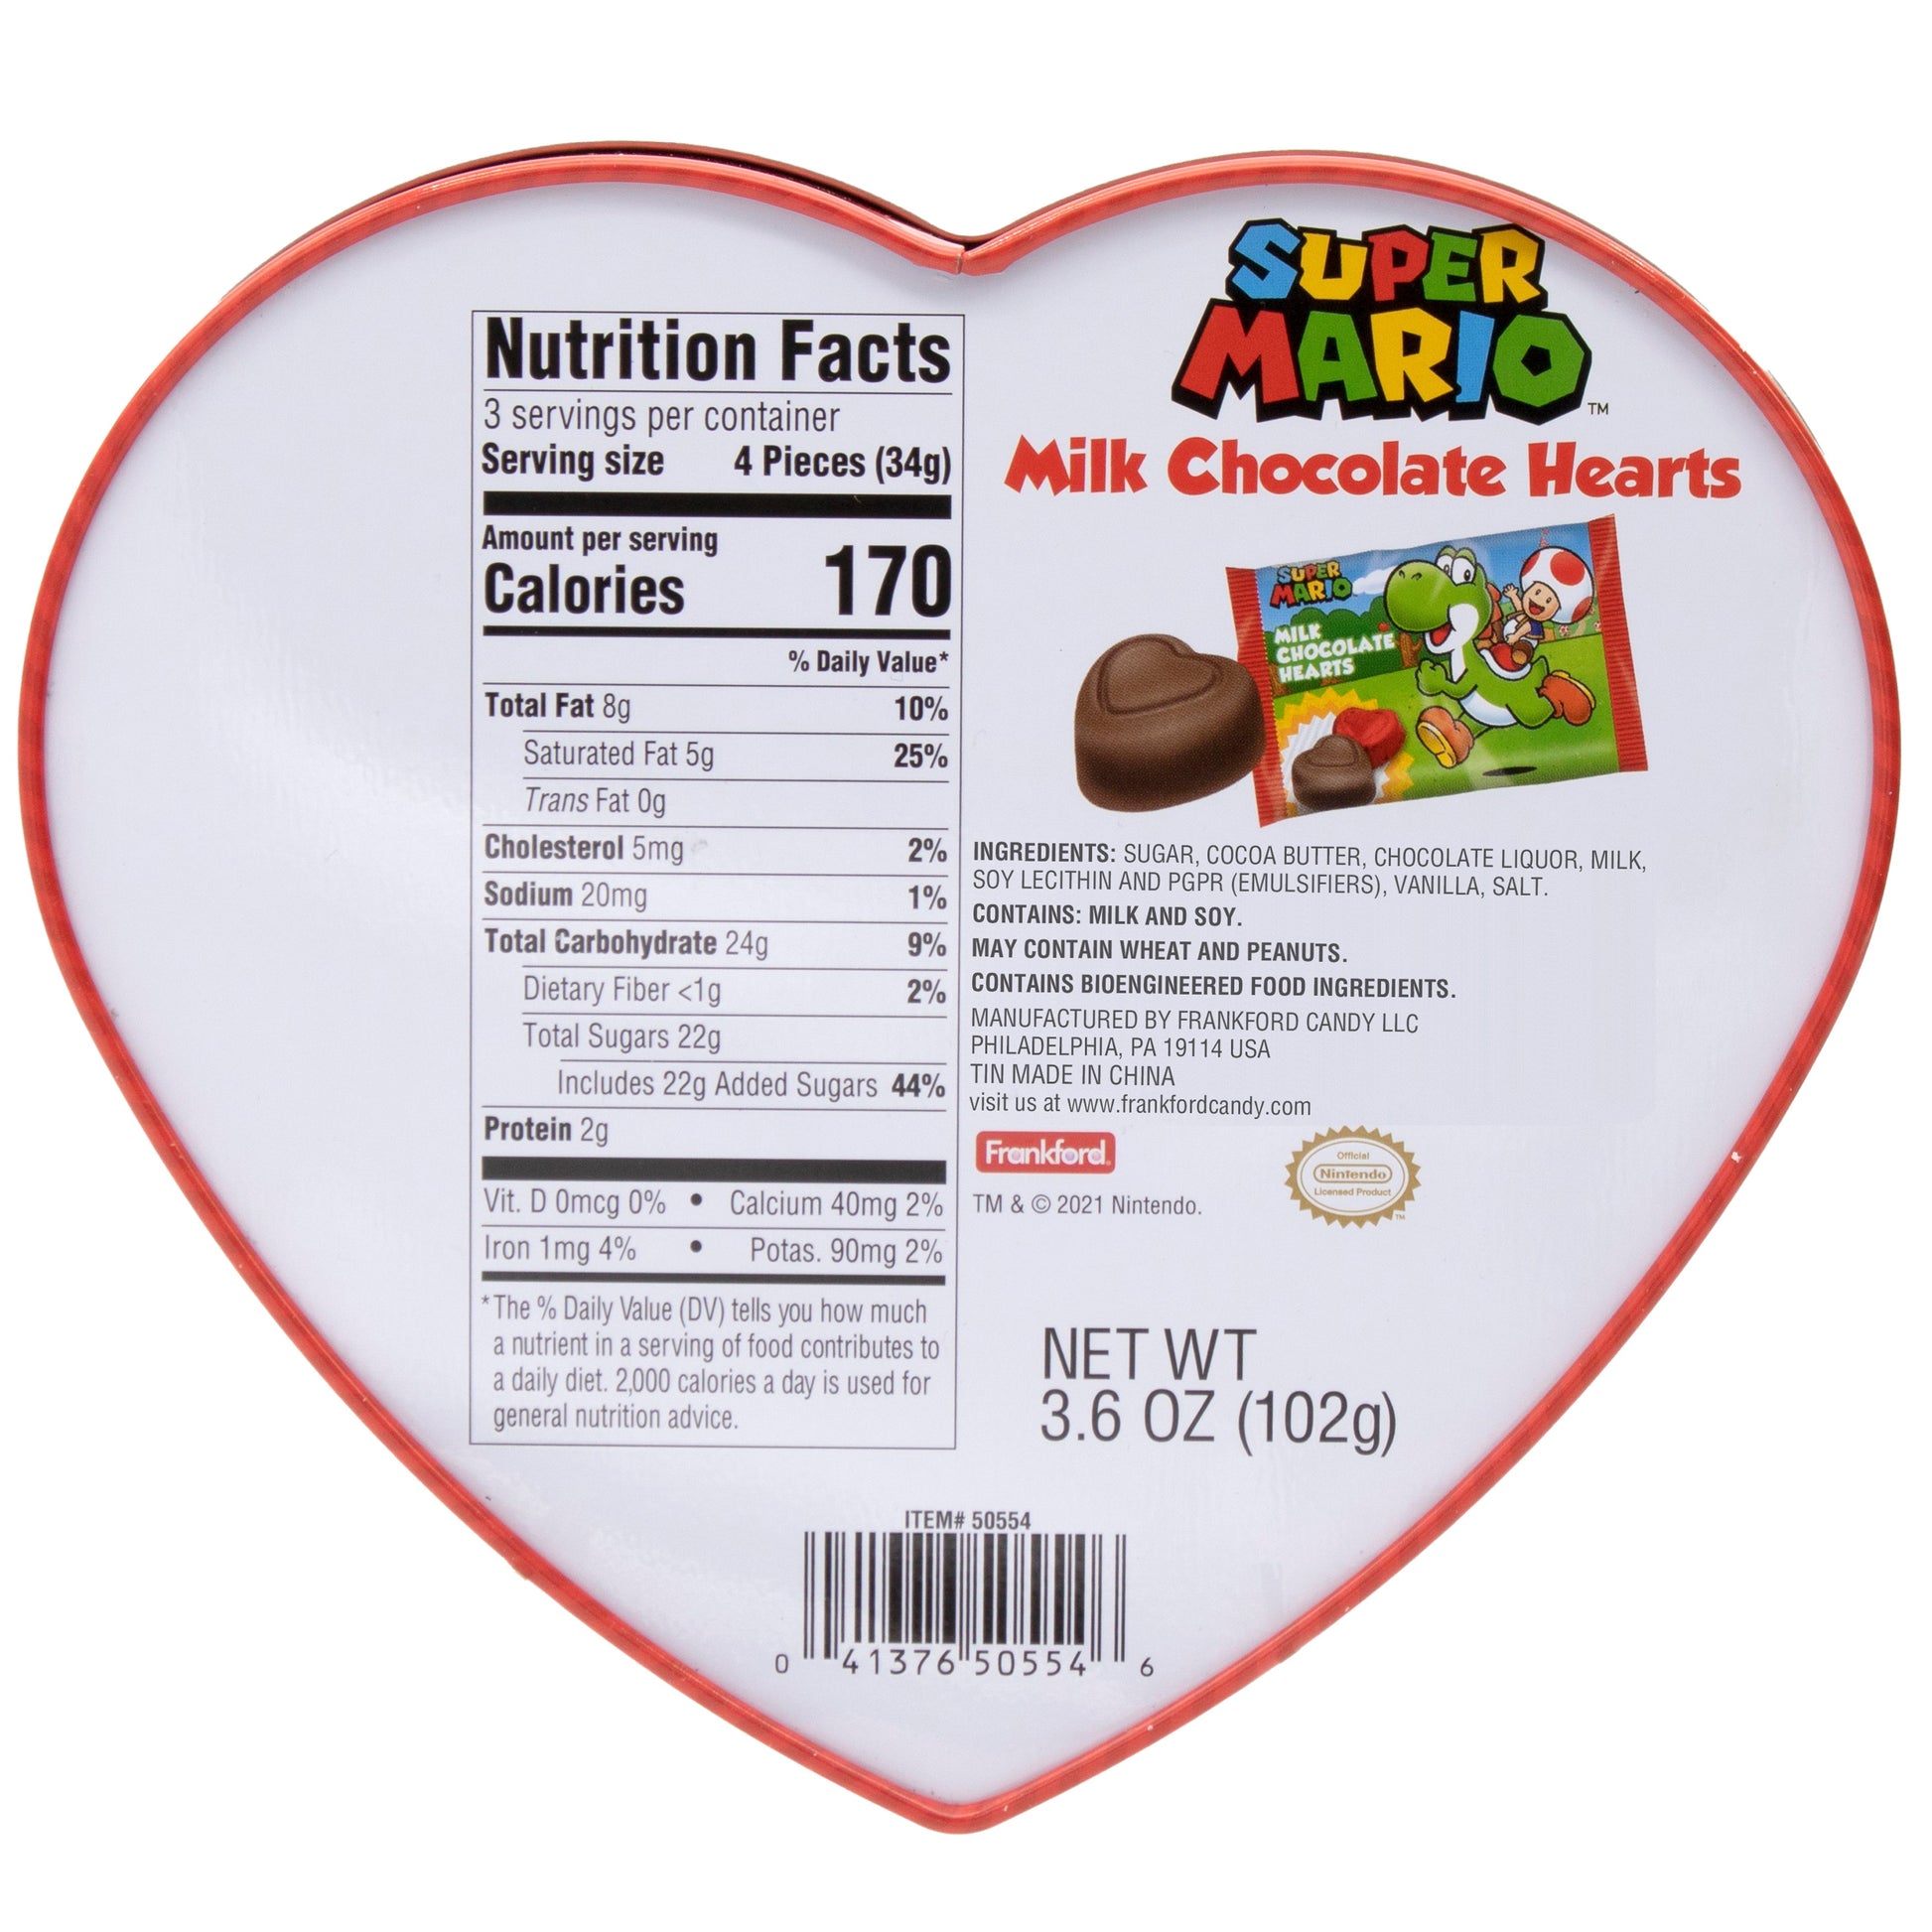 back of heart shaped box with nutrition facts and ingredients